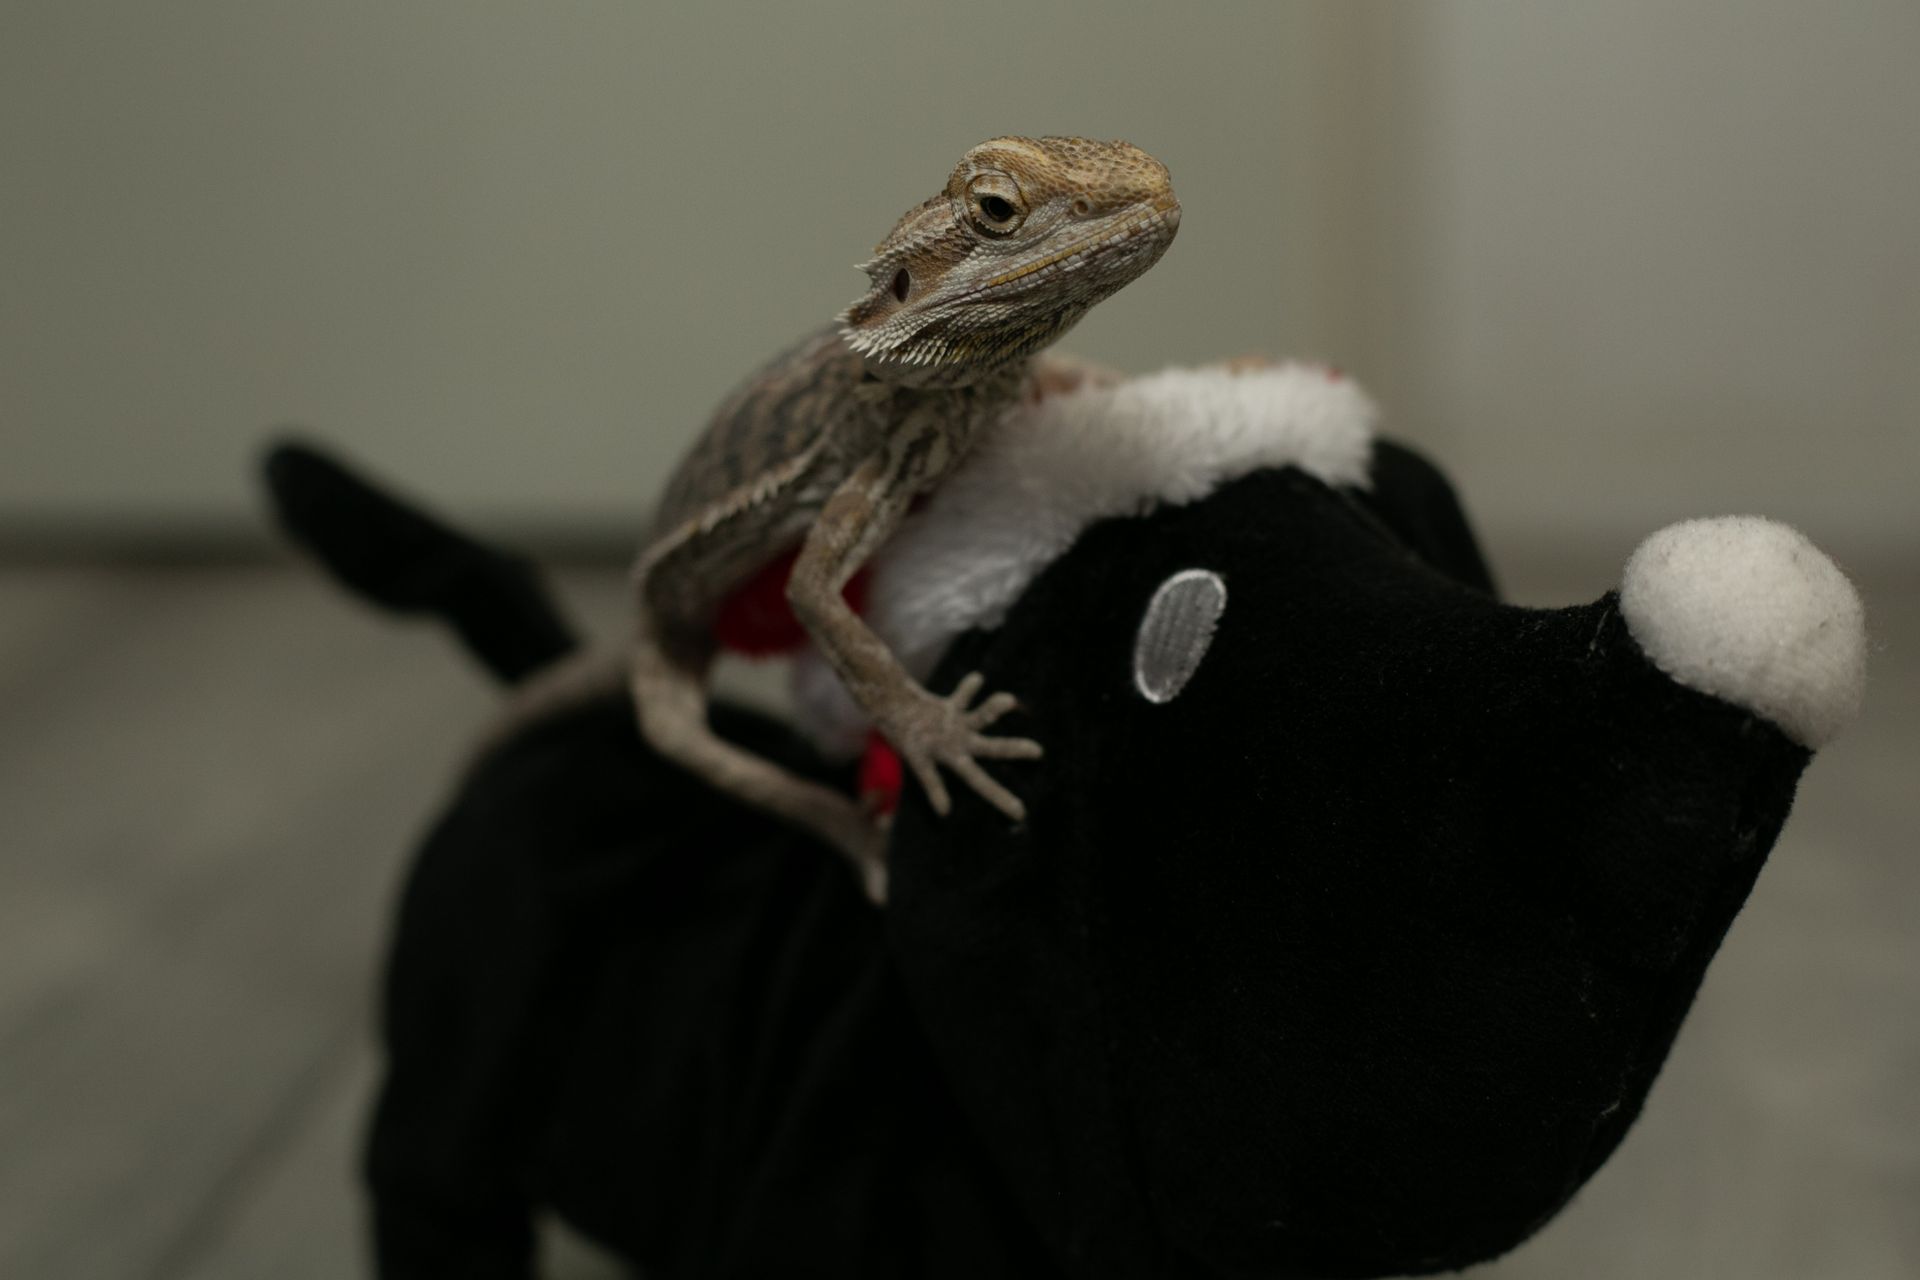 A bearded dragon perched on the back of a stuffed dog toy, showcasing the bond between pets and the